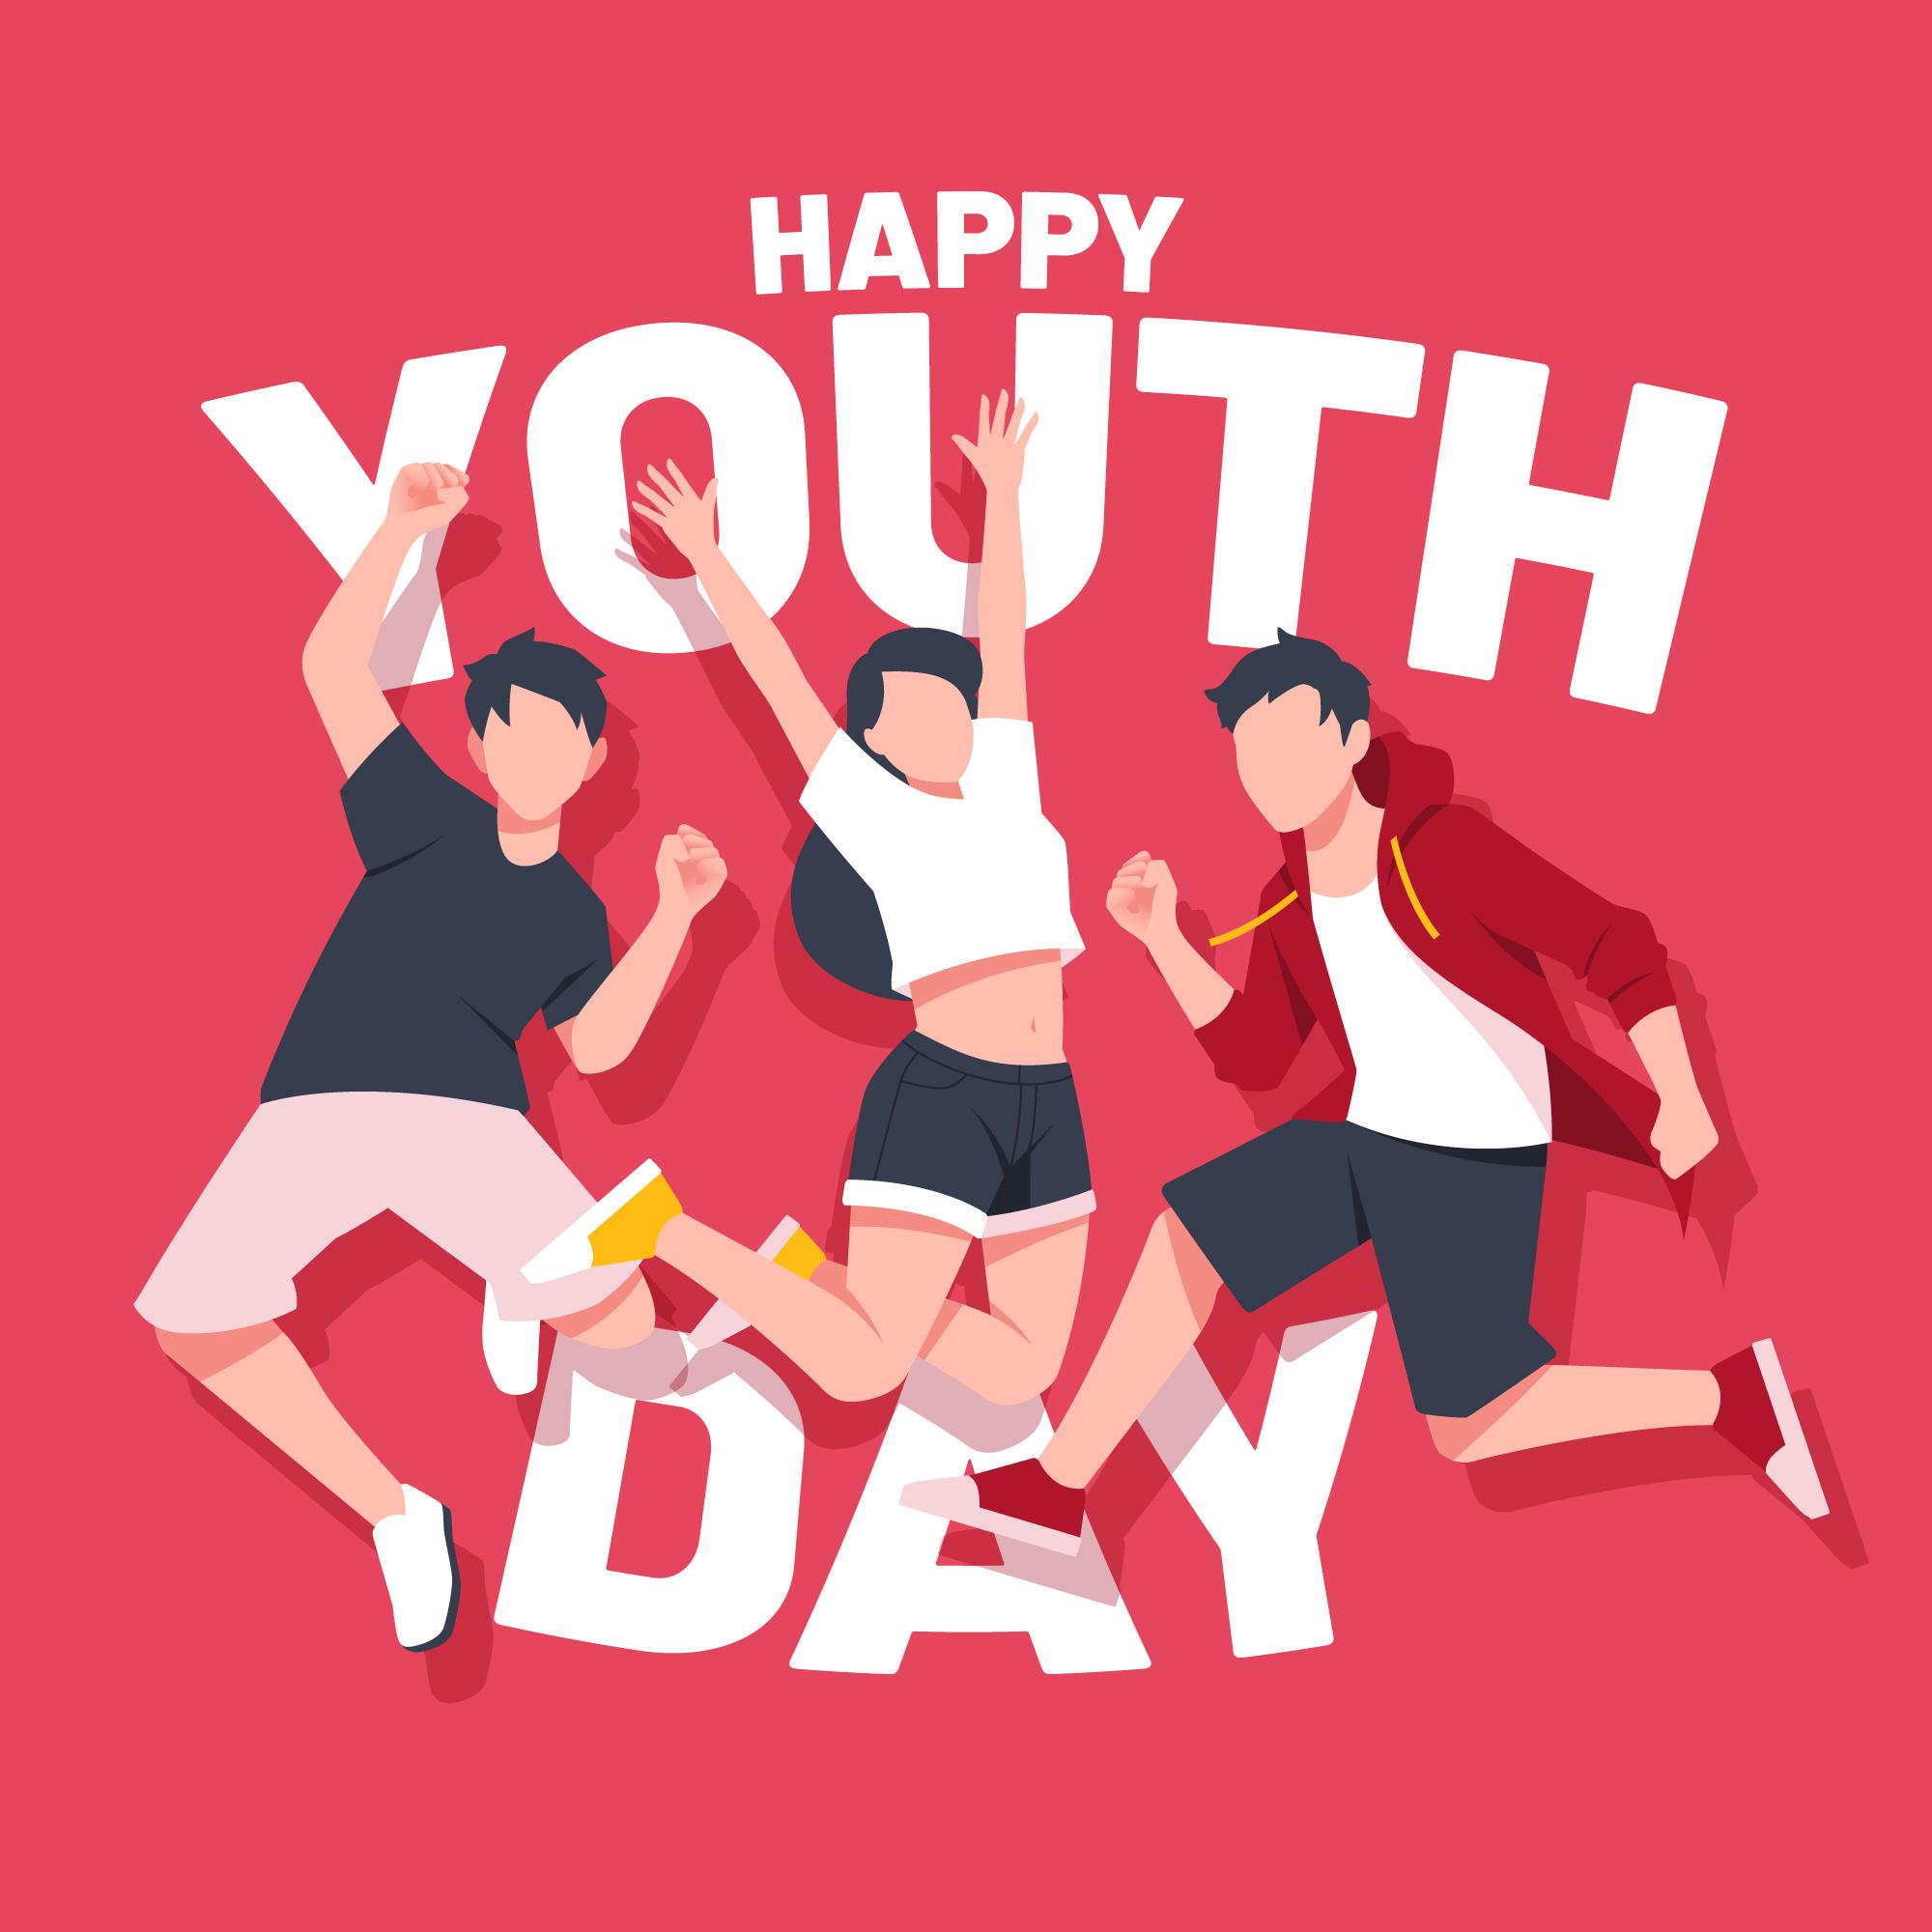 National Youth Day 2022